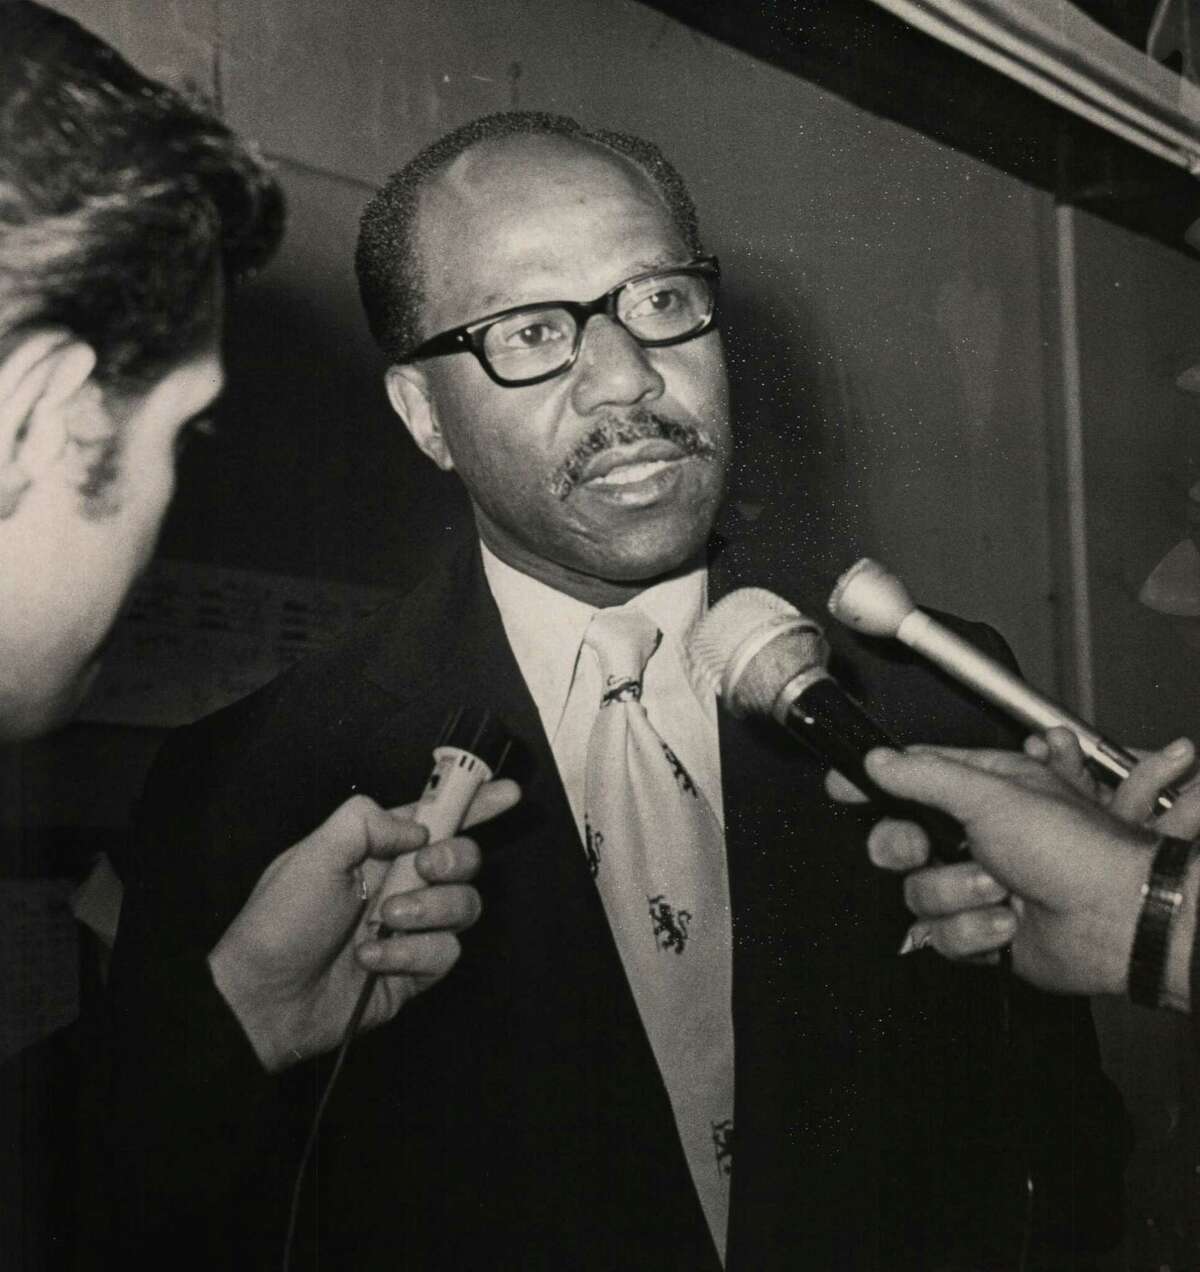 Henry “Hank” Parker, a former Connecticut state treasurer and New Haven Haven mayoral candidate in 1979.